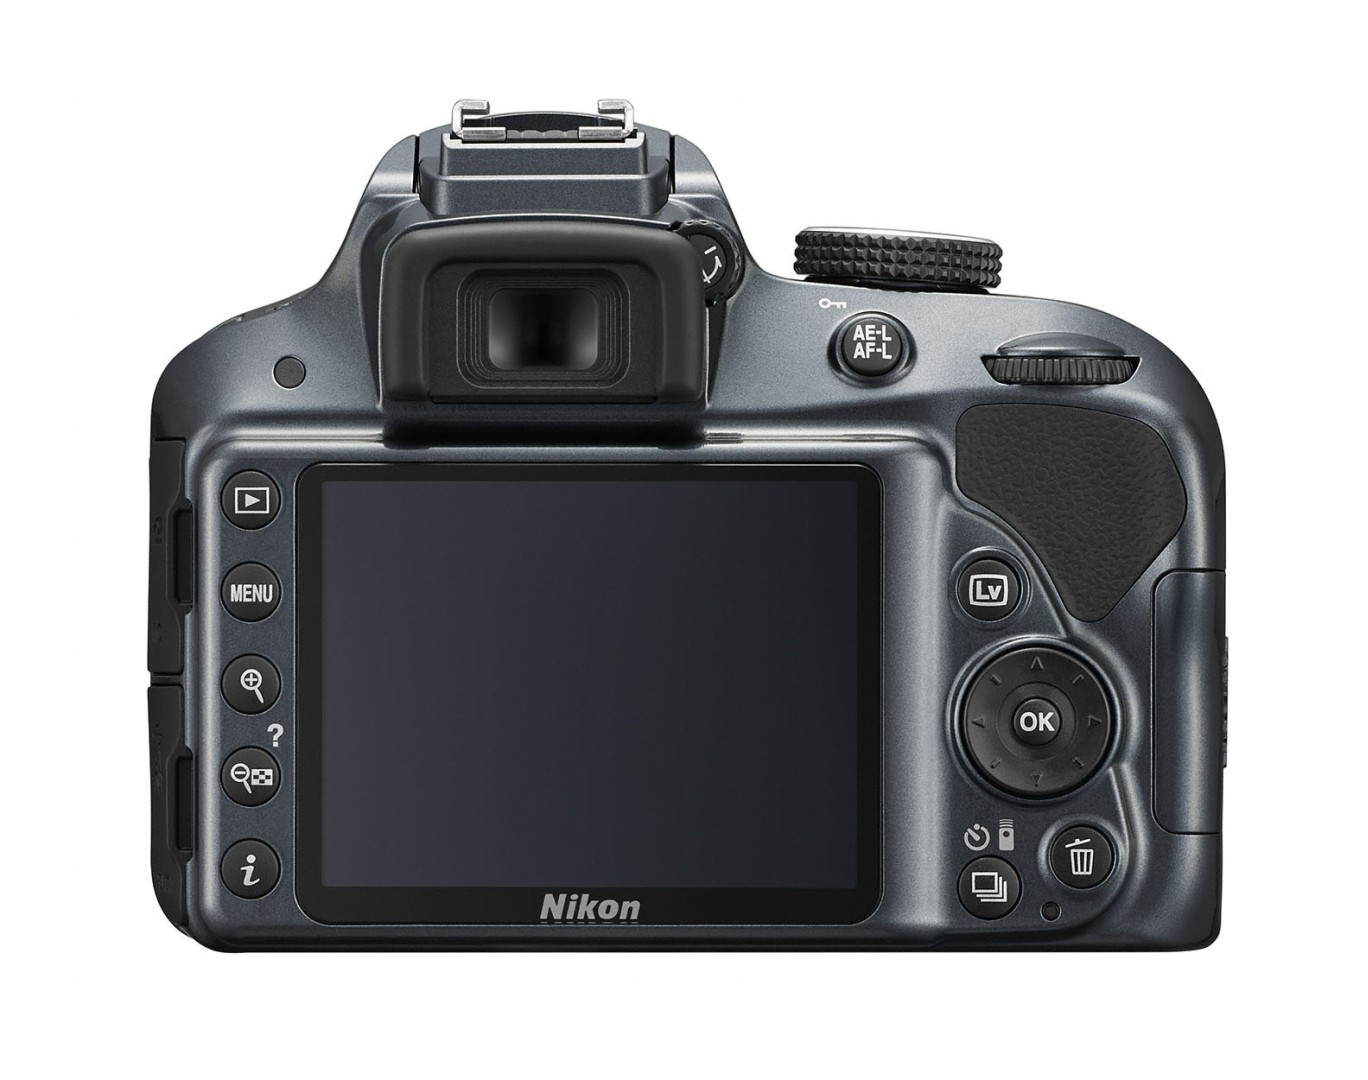 CES 2014: Nikon D3300 with 18-55mm f/3.5-5.6G VR II Lens Kit Officially